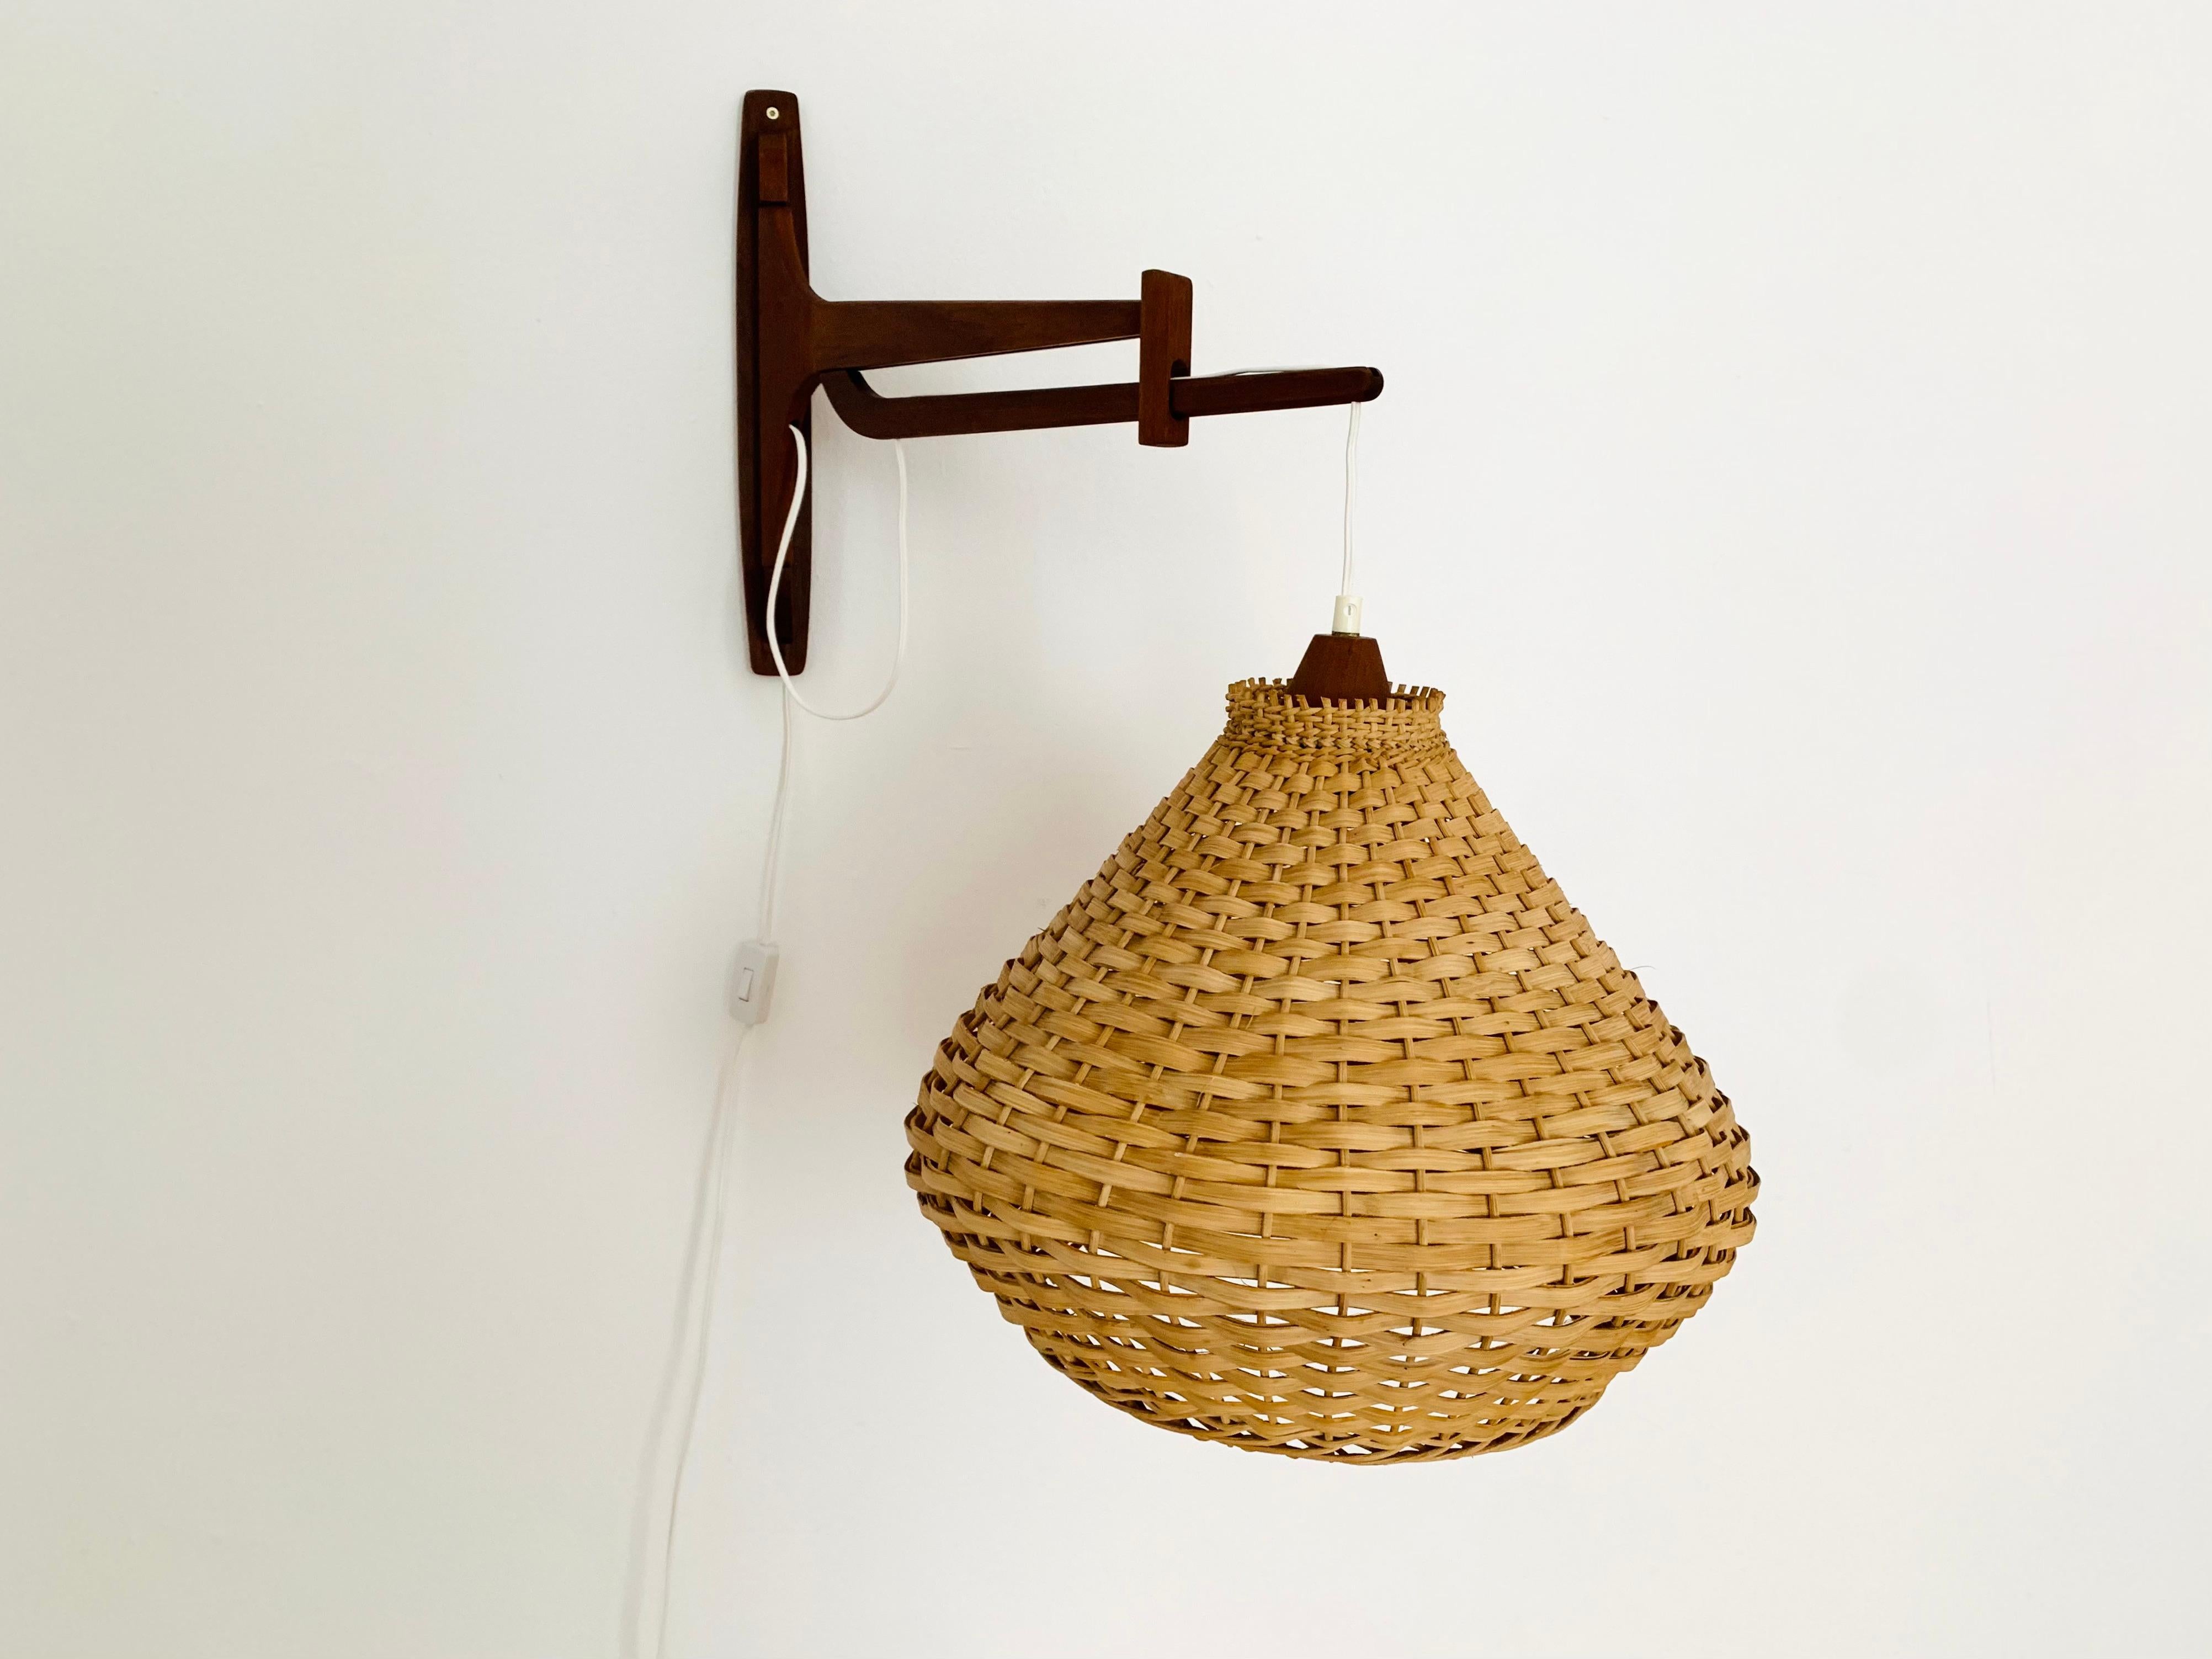 Wonderful Danish teak wall lamp from the 1960s.
Great and unusual design with a fantastically elegant appearance.
Very nice swiveling and extendable teak arm.
The rattan lampshade creates a very cozy atmosphere.

Condition:

Very good vintage